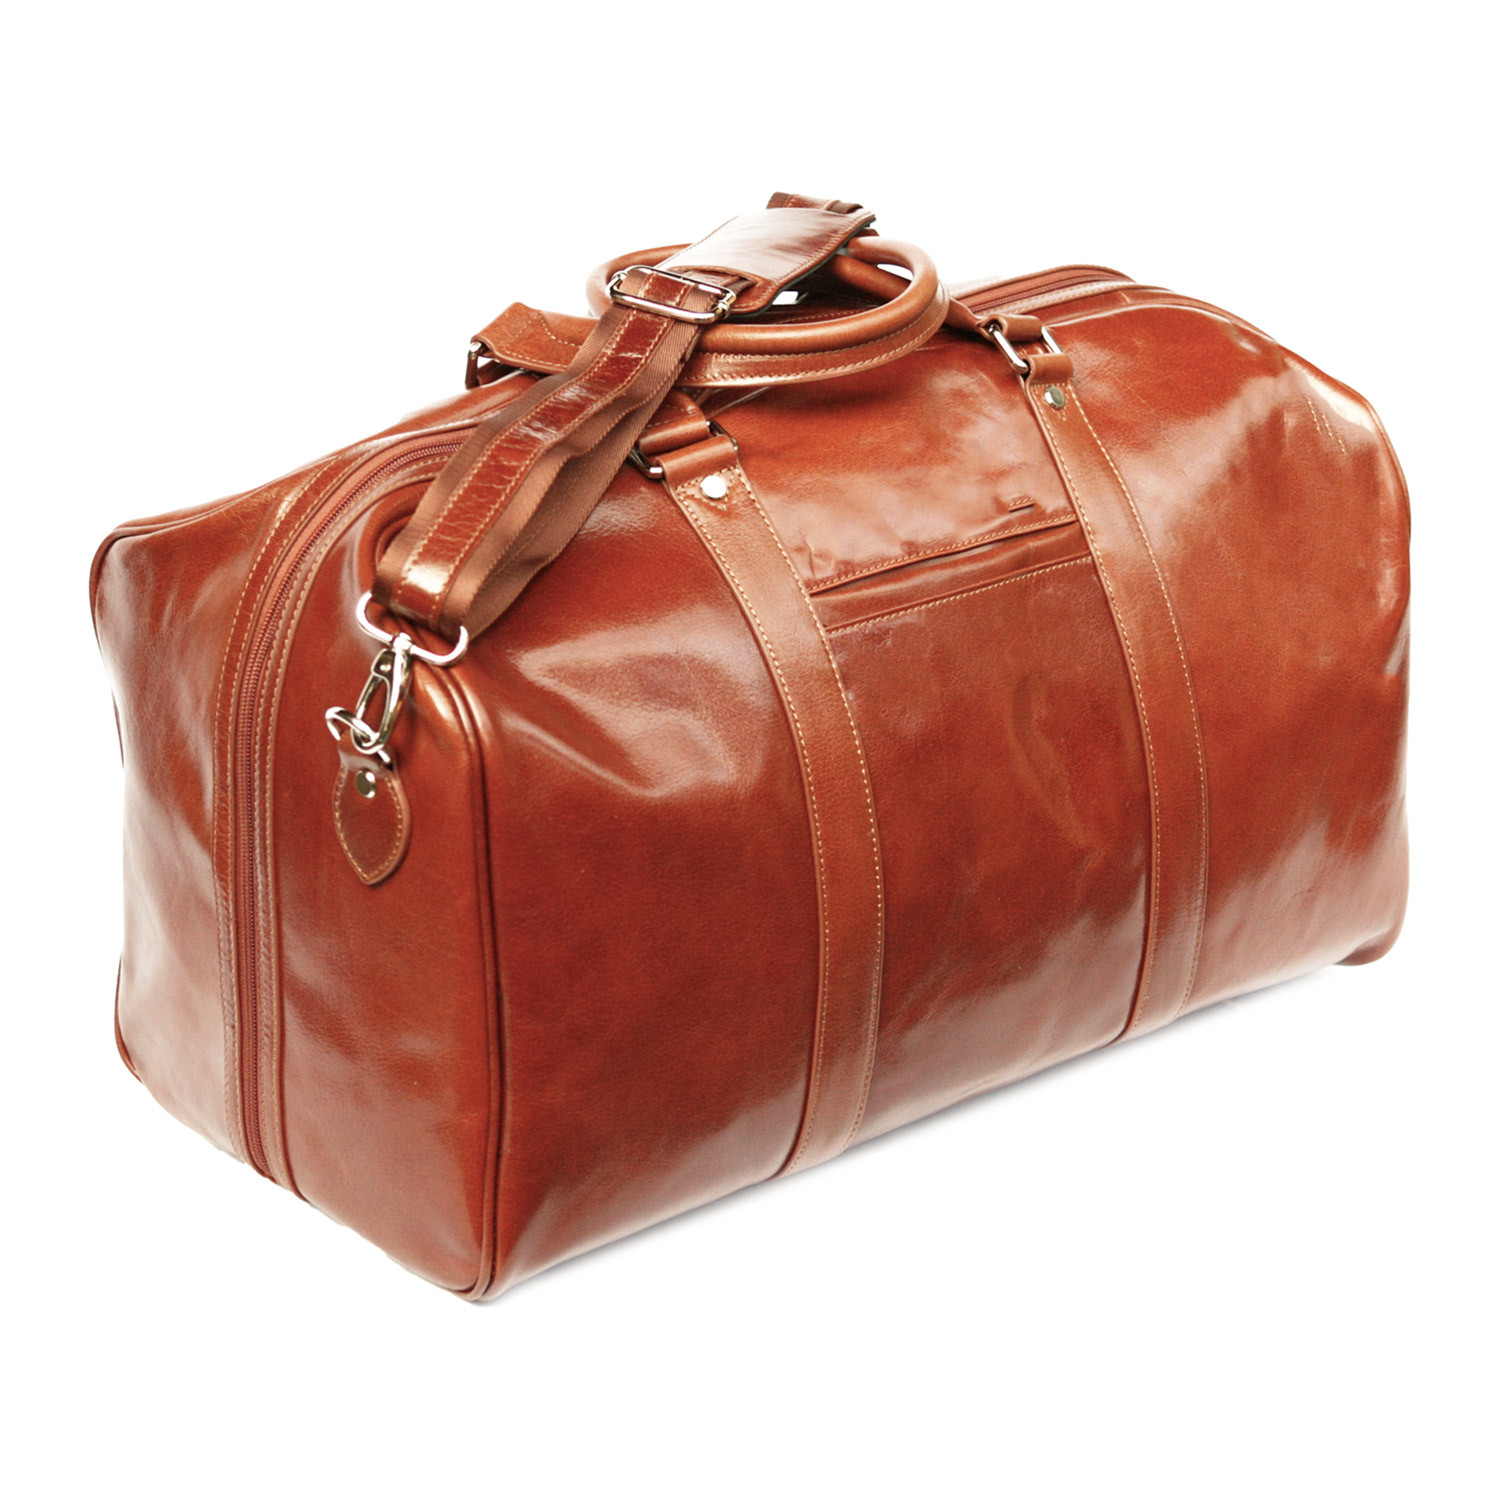 Lombardy Travel Bag - S. Babila - Touch of Modern